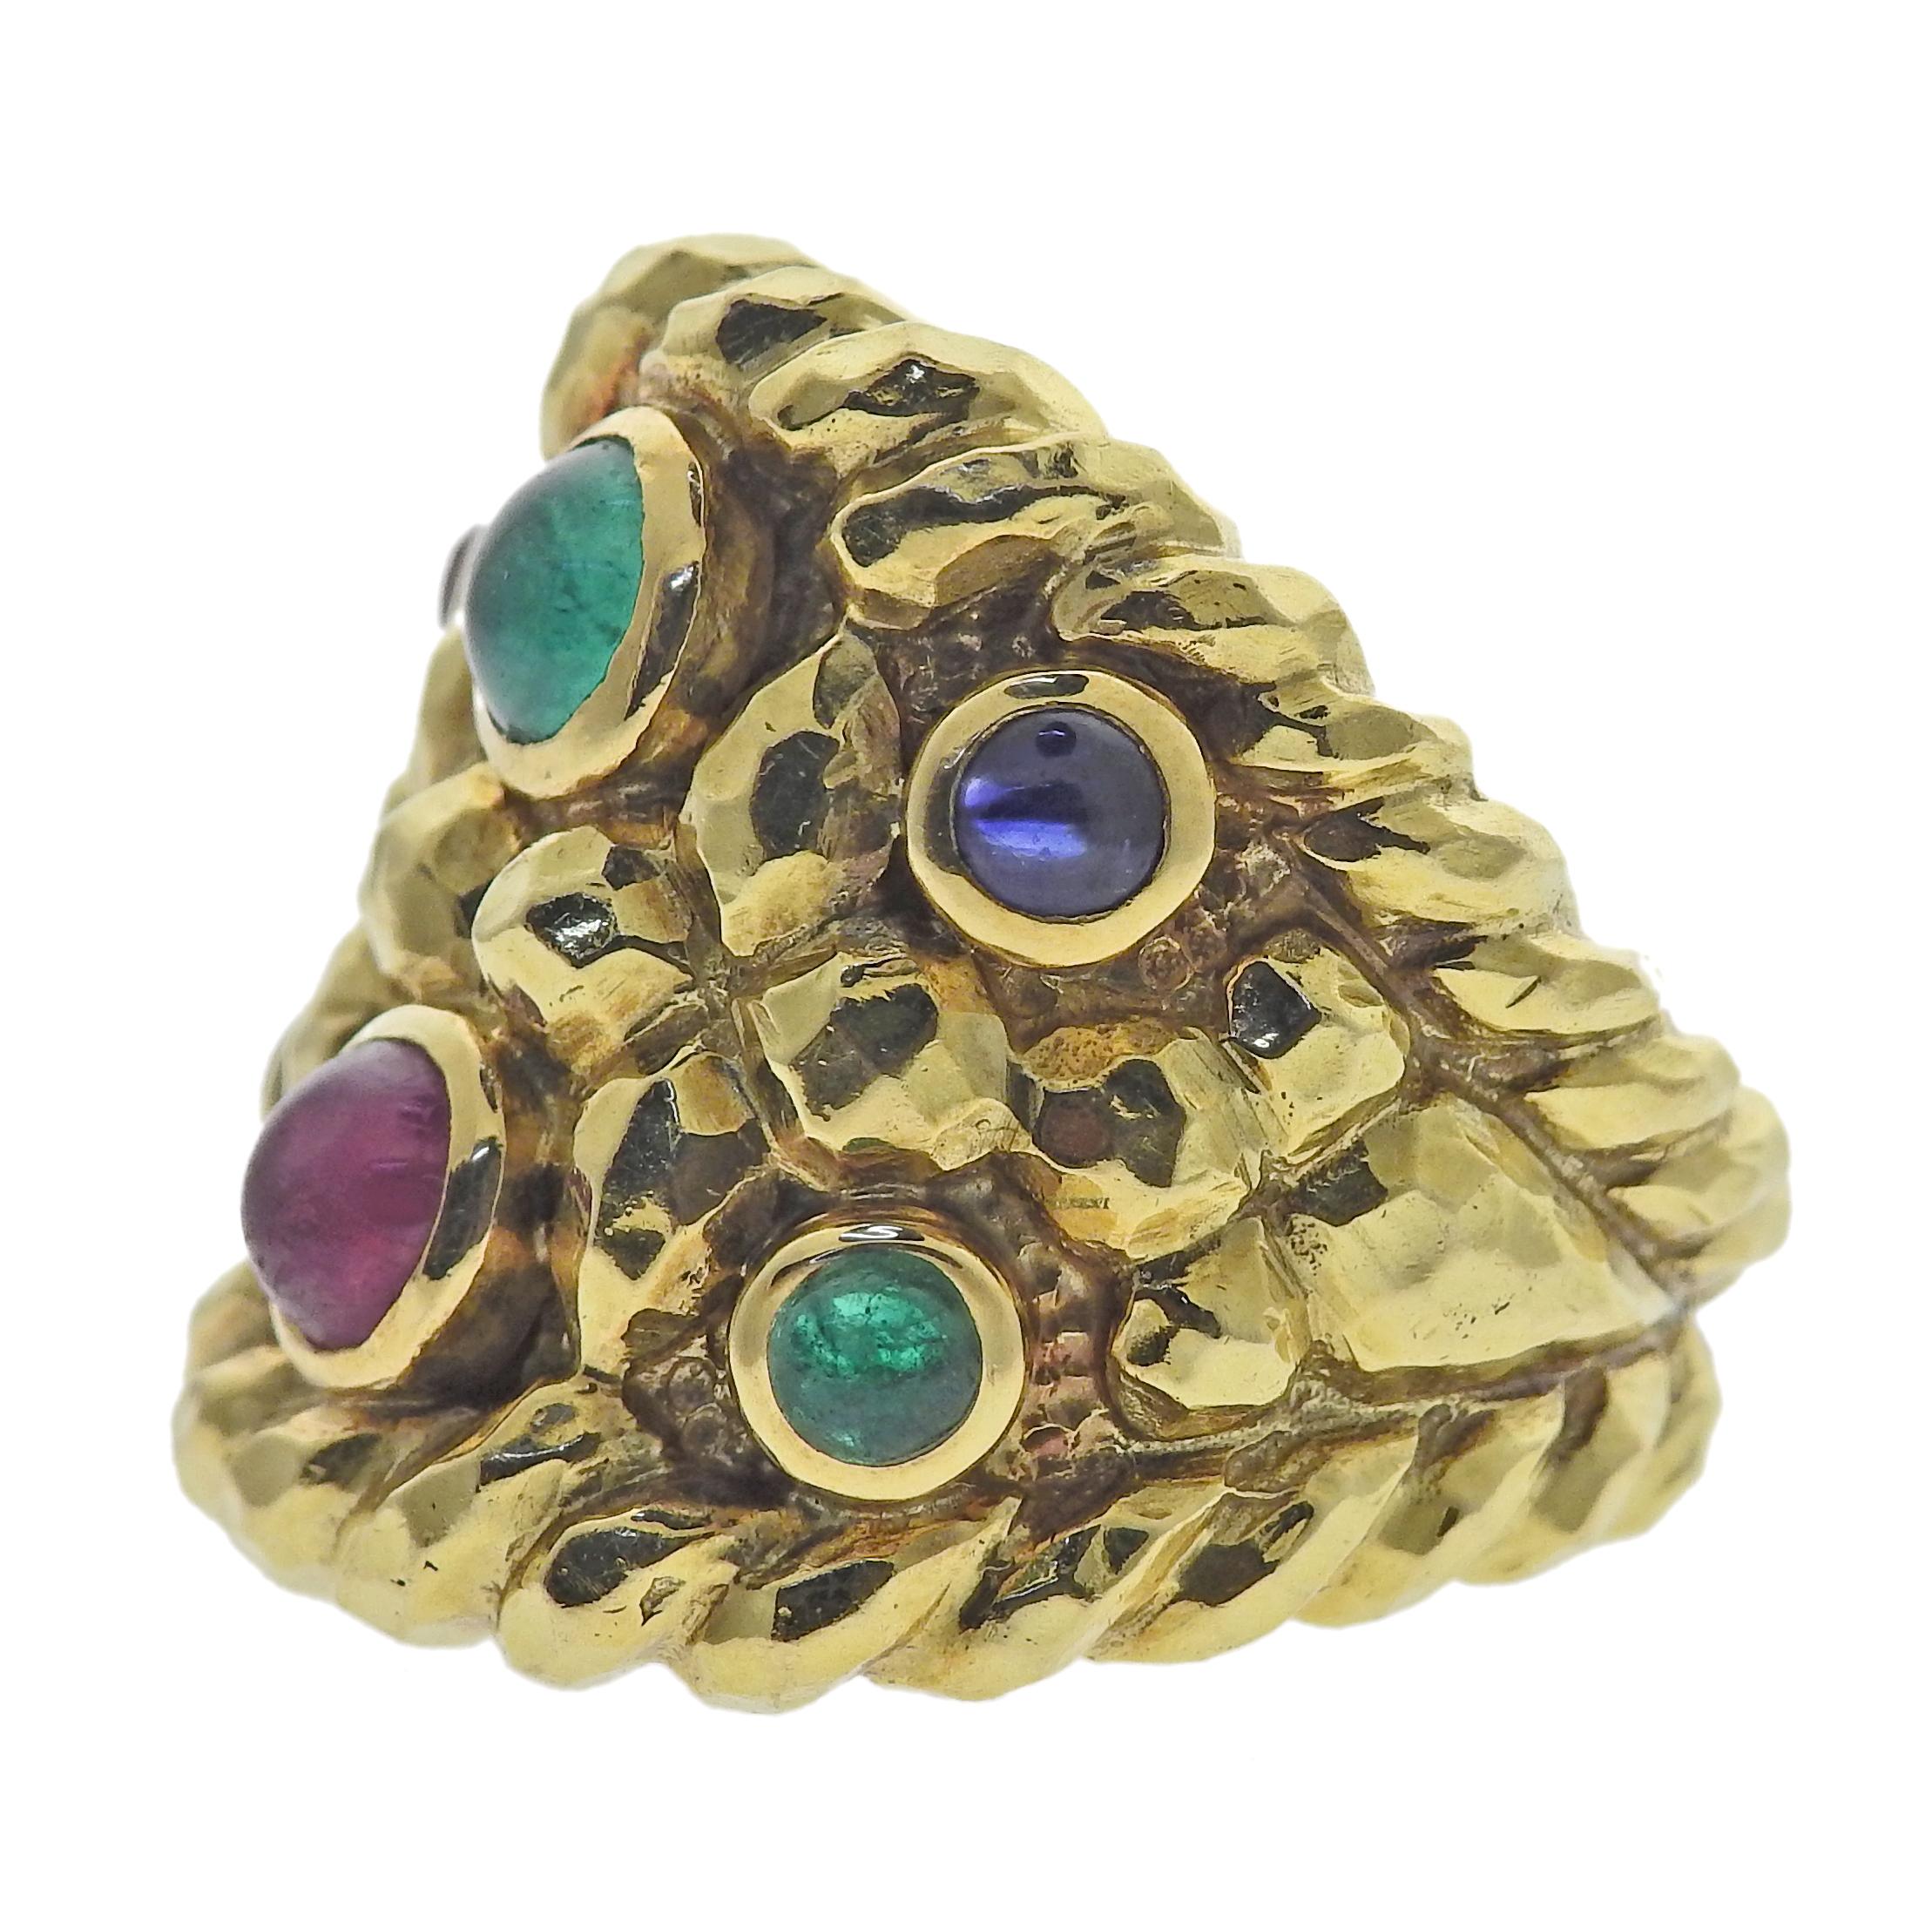 David Webb 18k Yellow Gold Ring set with Sapphire, Emerald and Ruby.  Ring size 6; top of the ring measures 25mm wide. Marked: David Webb, 18k,AA767. Weight is 27.7 grams.